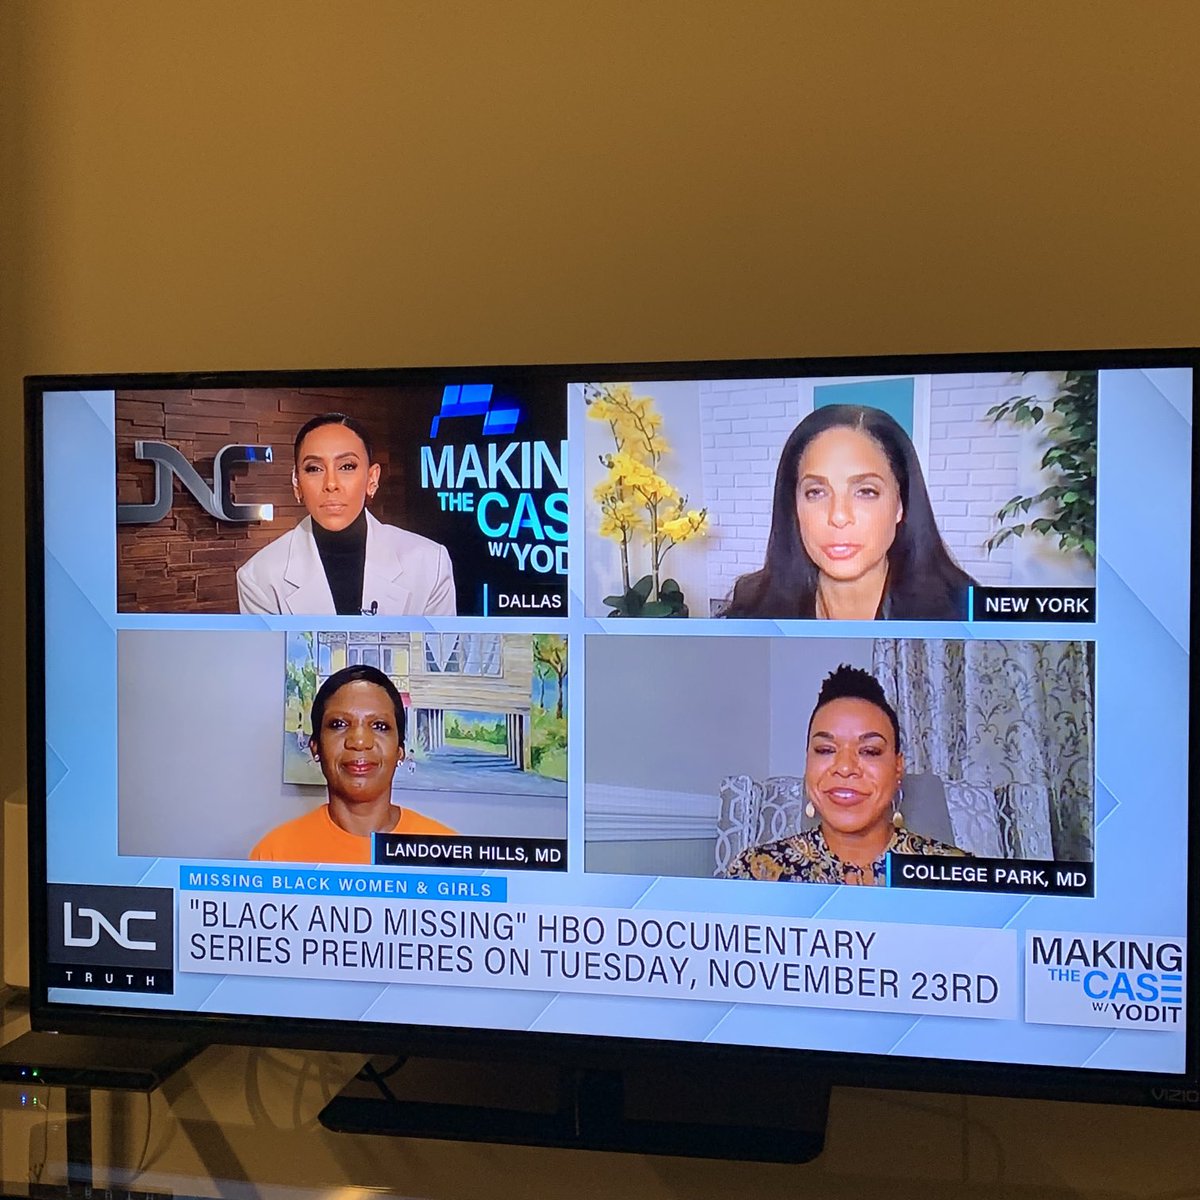 SO PROUD of the work my sis ⁦@yodittewolde⁩ is doing. Also great seeing ⁦@soledadobrien⁩ on the show tonight for such an important issue as #blackandmissing . I’f y’all are not watching #makingthecase on ⁦@BNCNews⁩ you’re missing out! #trustblackwomen